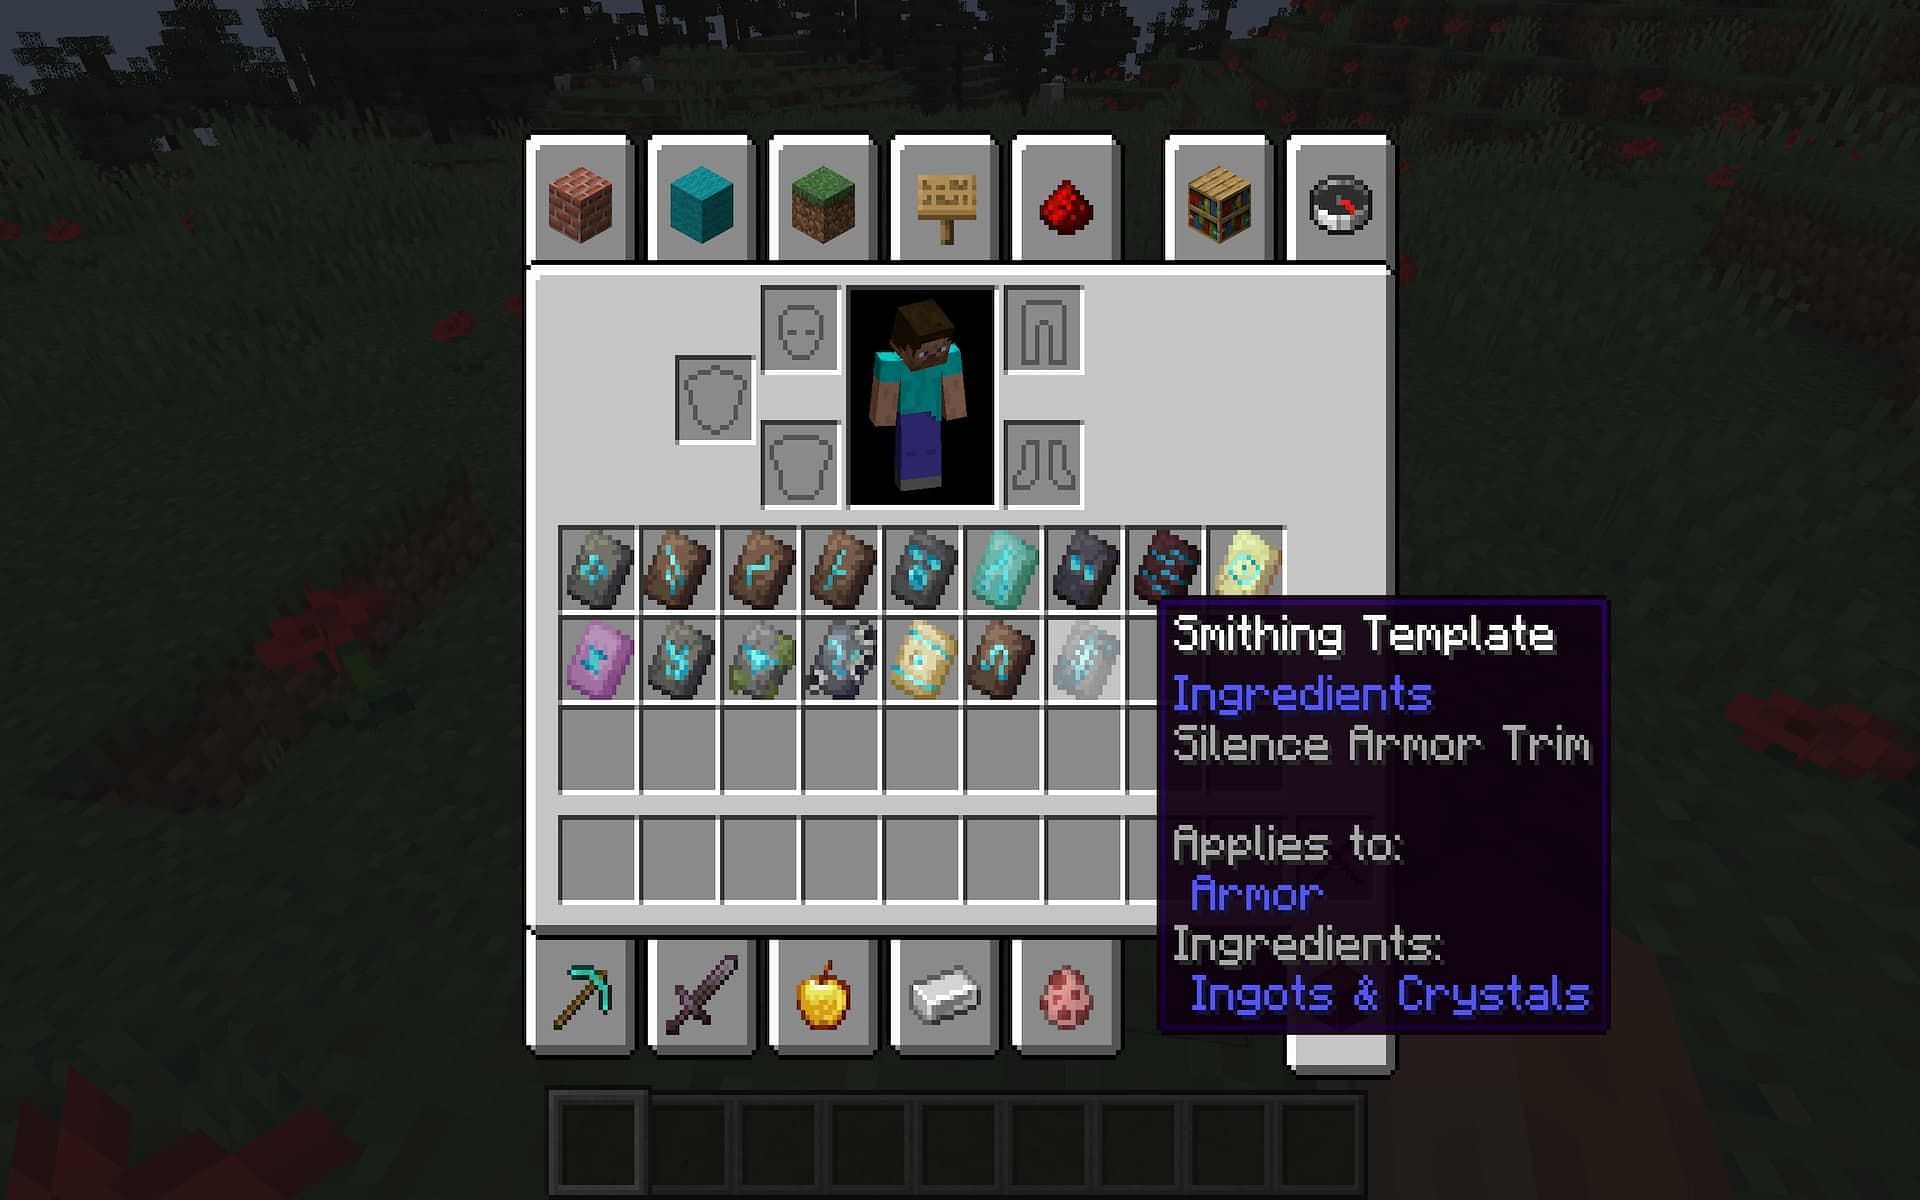 The silence armor trim is the rarest of all (Image via Minecraft)